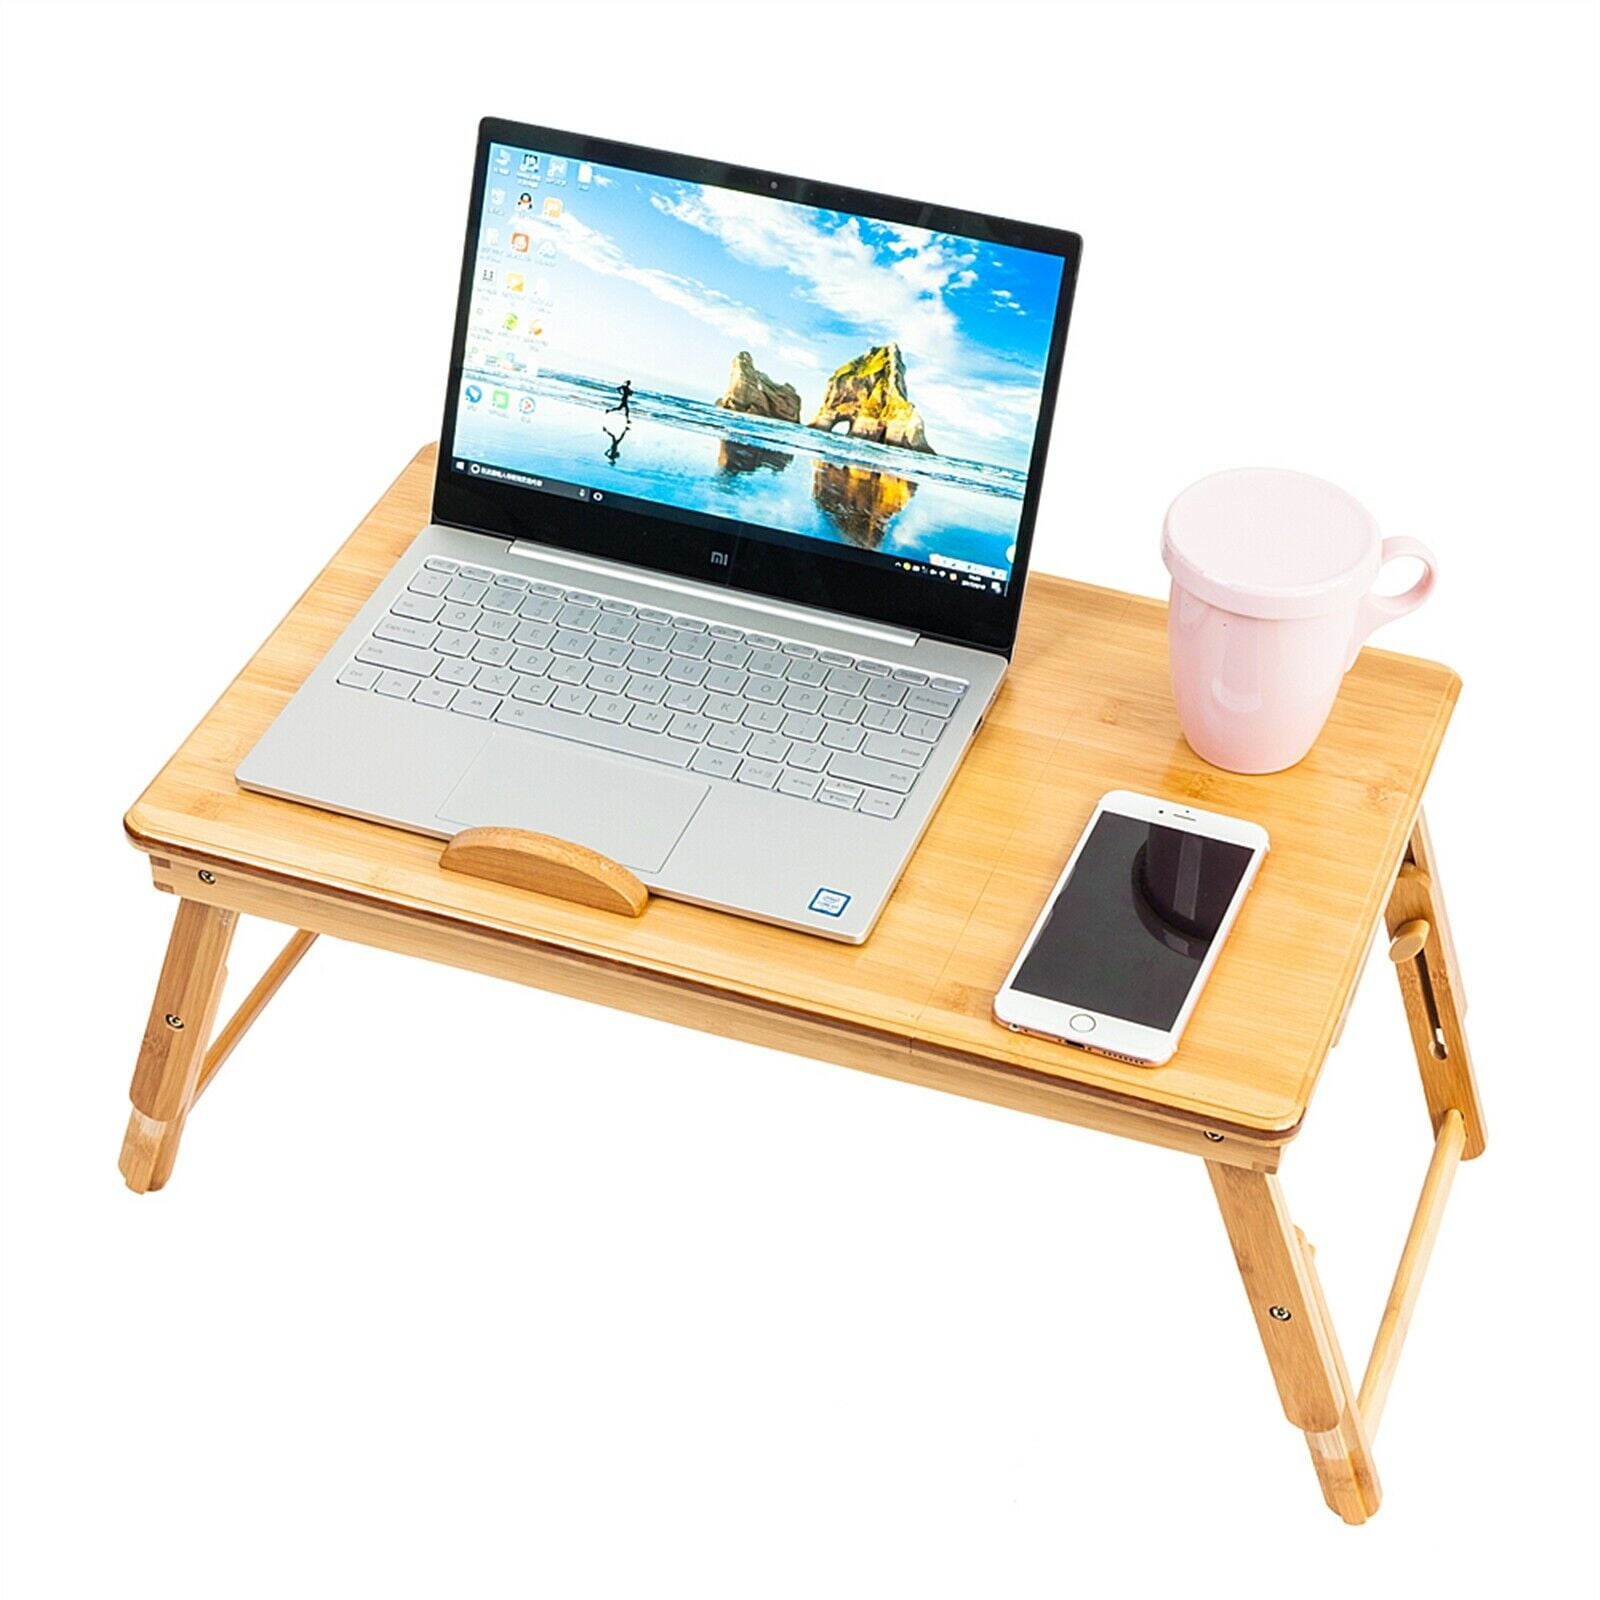 Bamboo Portable Laptop Desk Folding Foldable Lap Tray Bed Adjustable Table Stand 